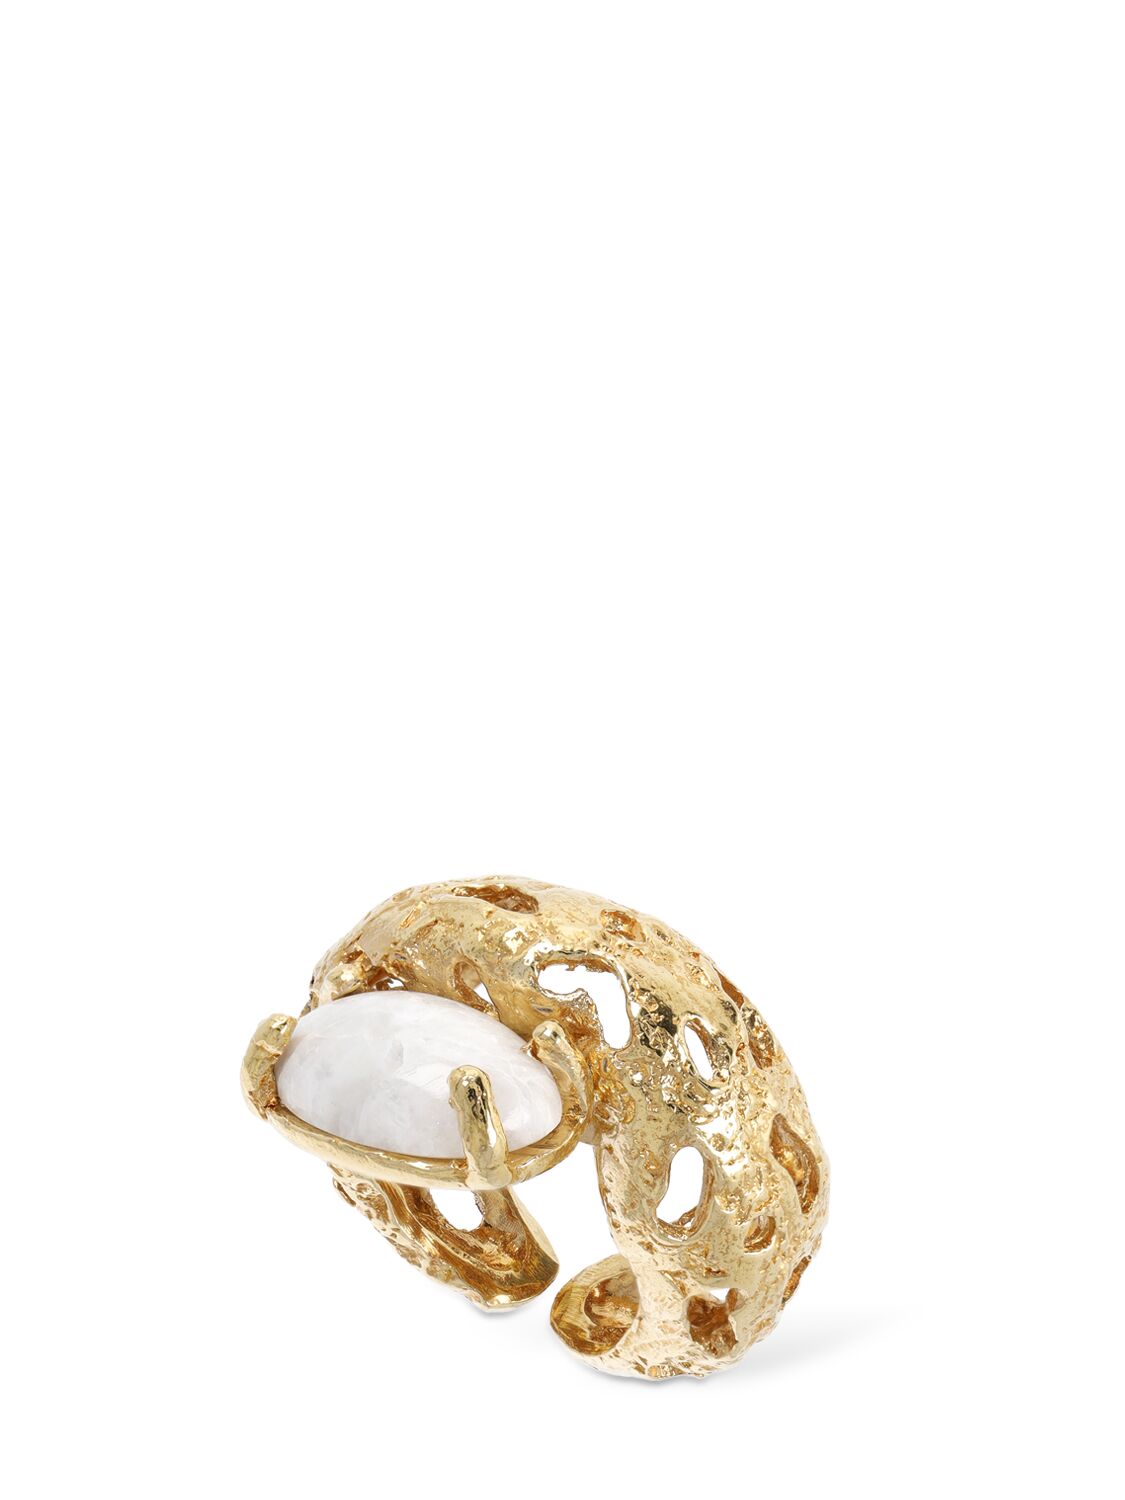 Paola Sighinolfi Mayge Stone Thick Ring In Gold,white